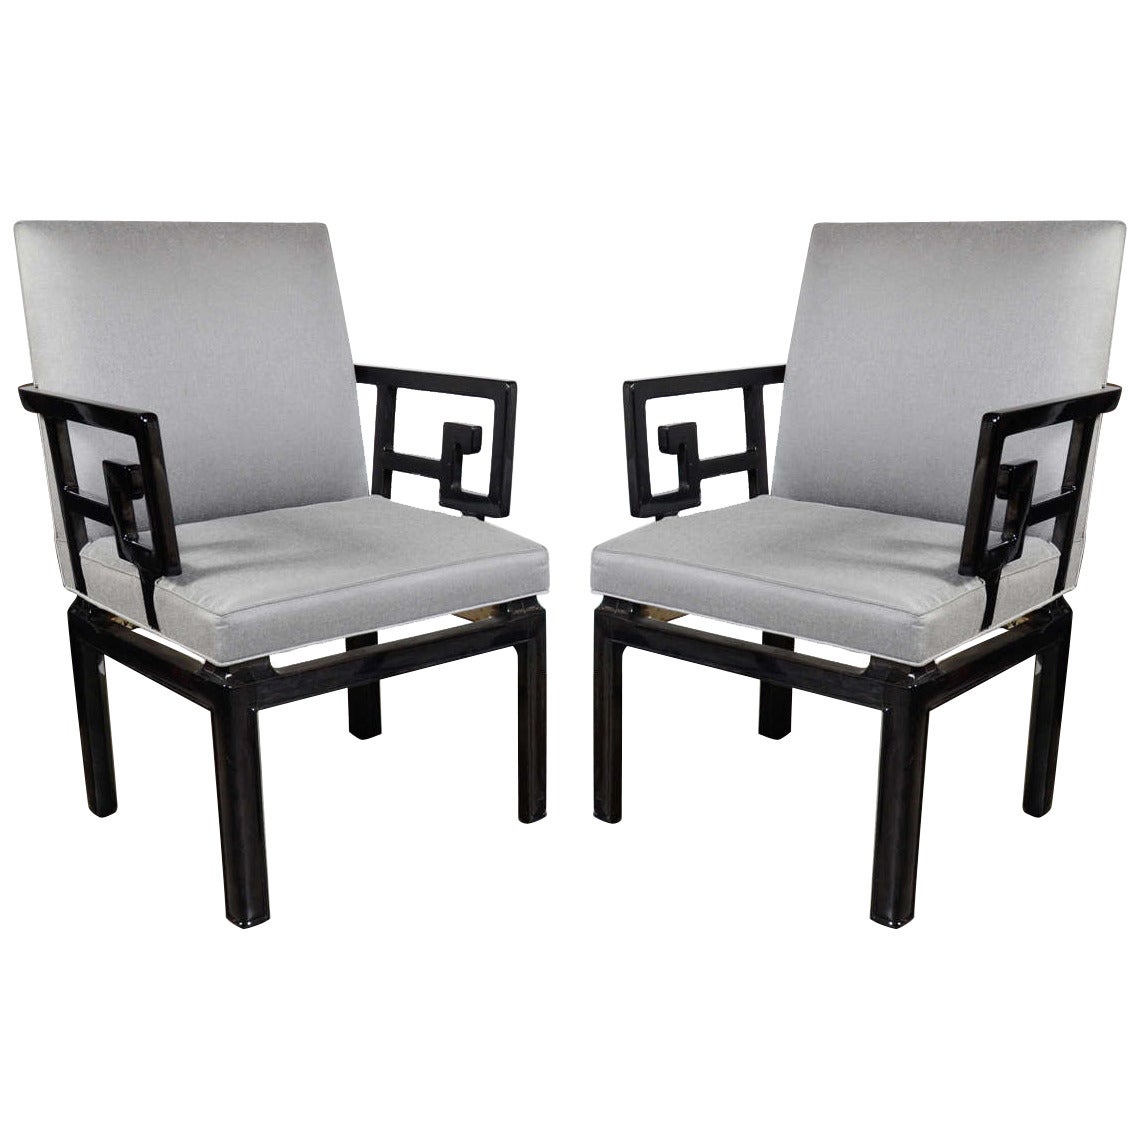 Pair of Mid Century Modern Baker Occasional Chairs in Black Lacquer